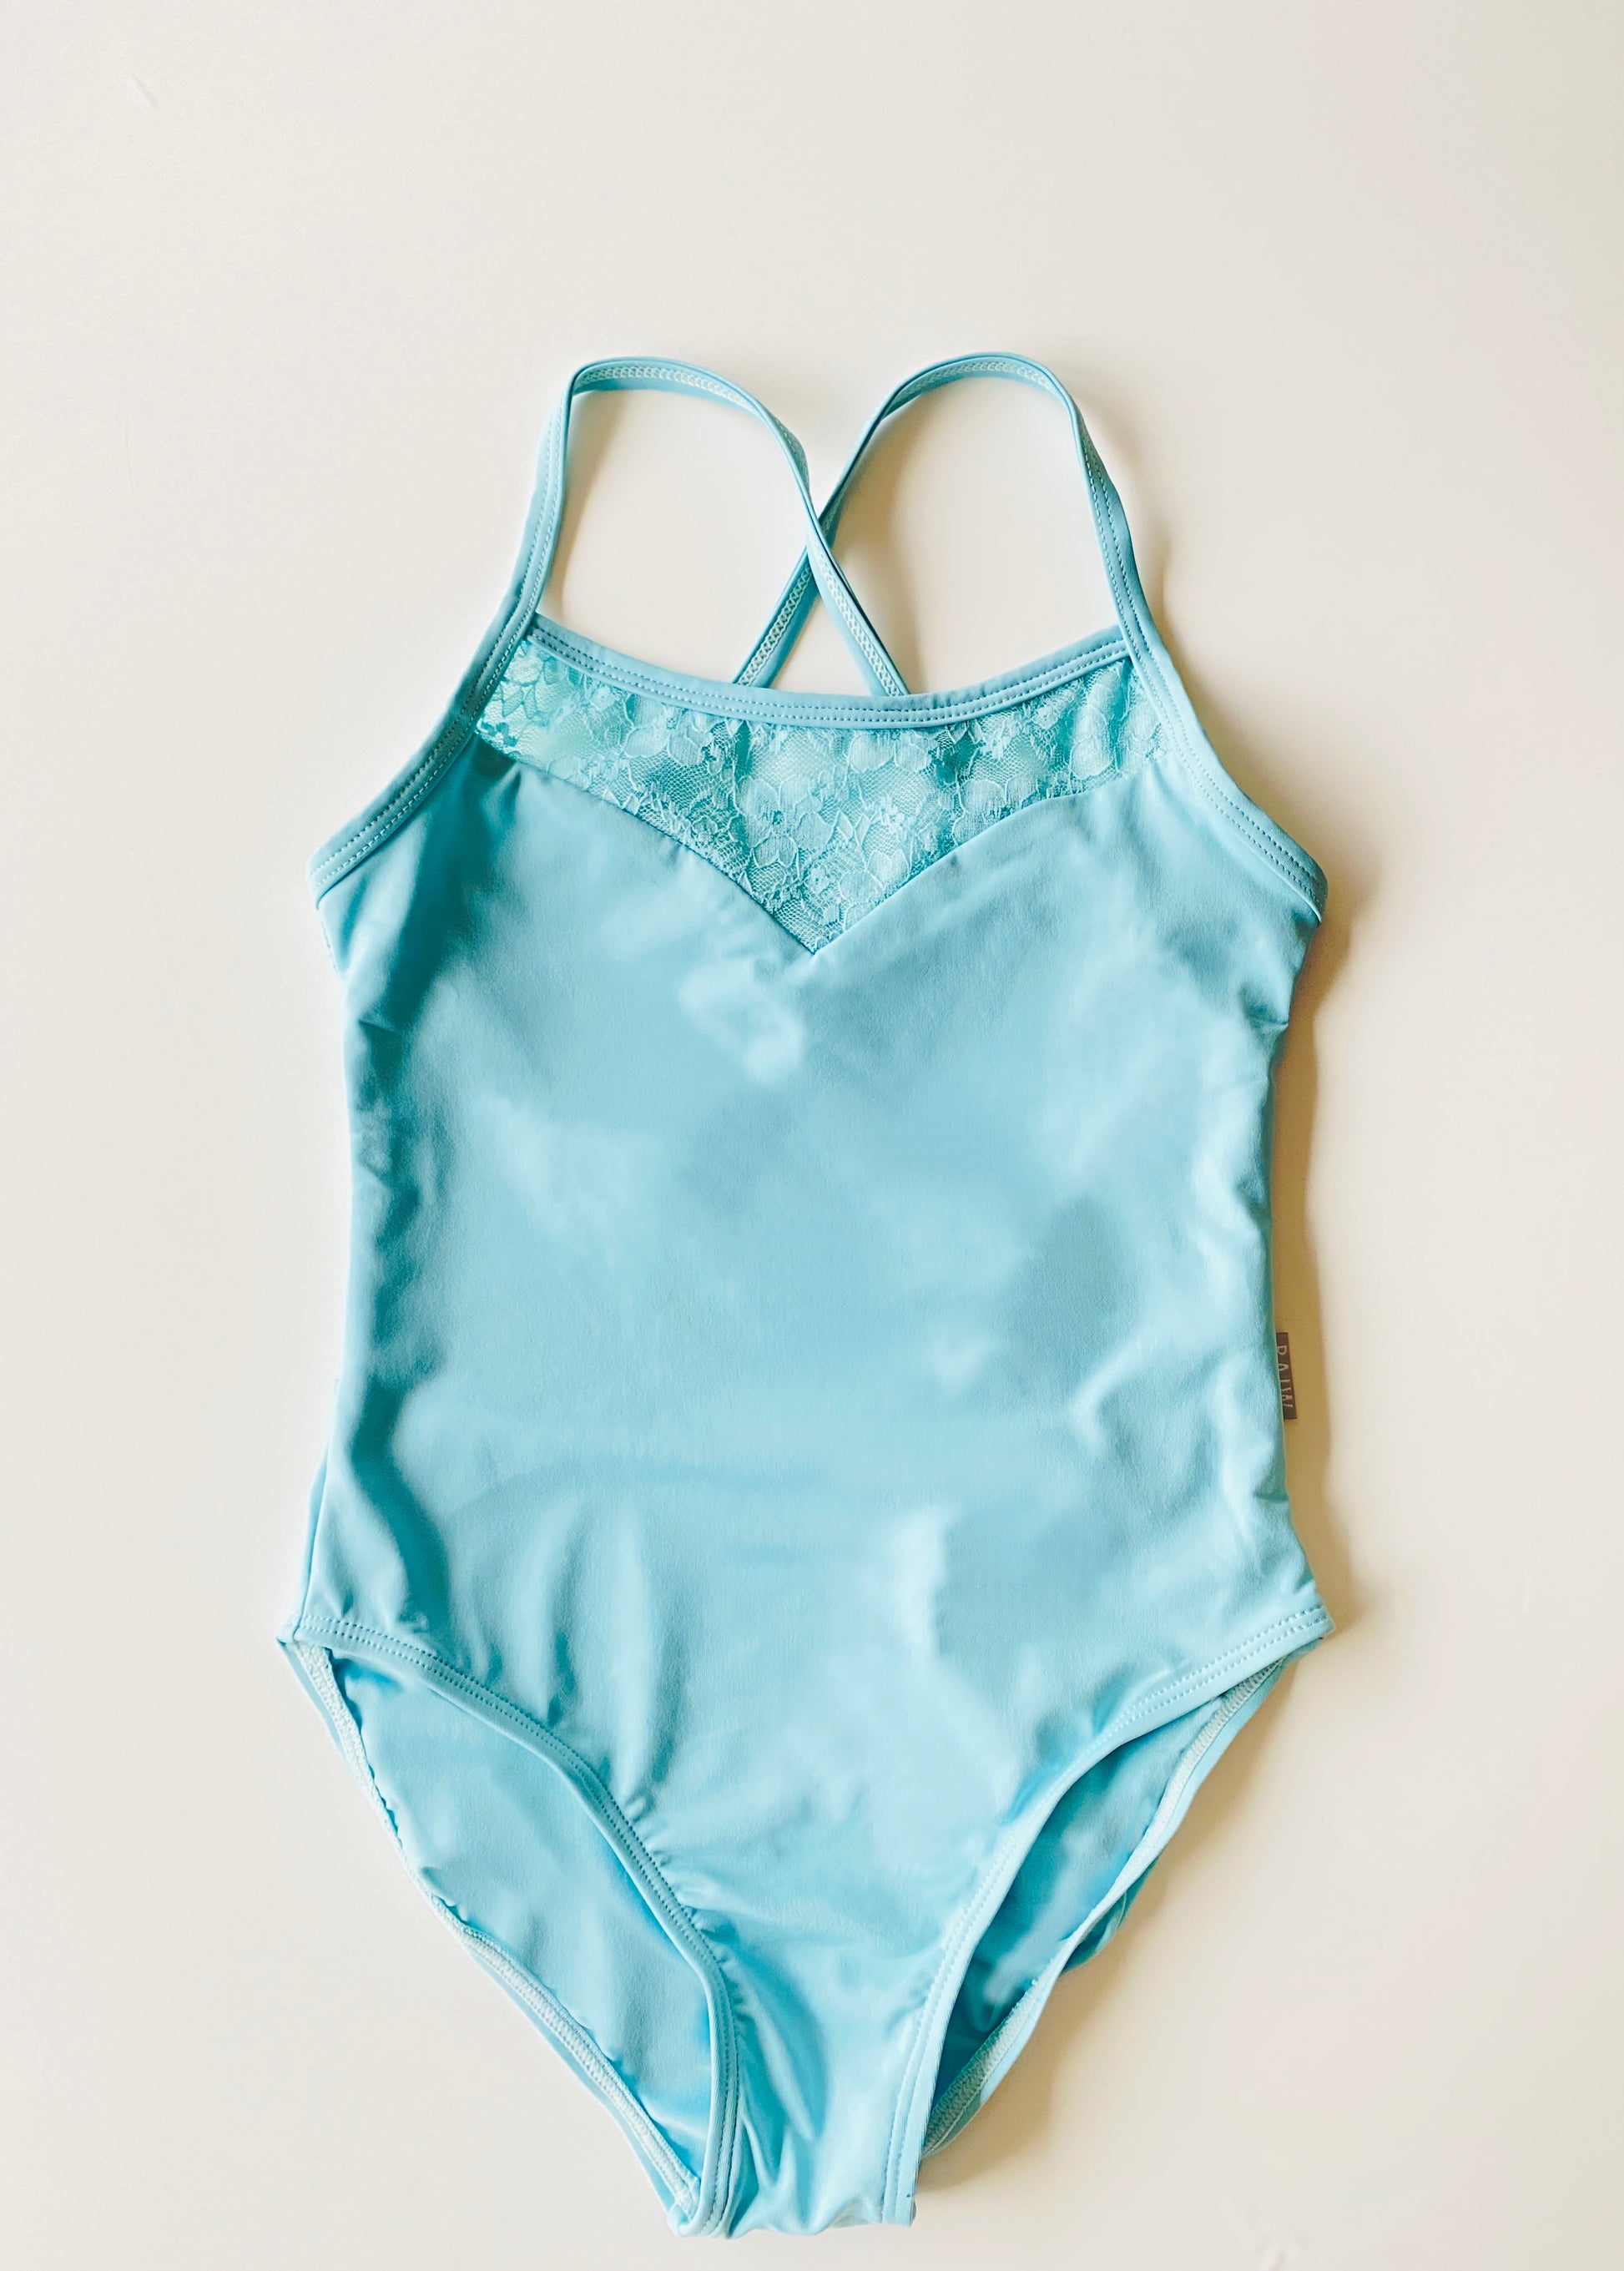 Baiwu Aqual Camisole Leotard for children, kids from The Collective Dancewear